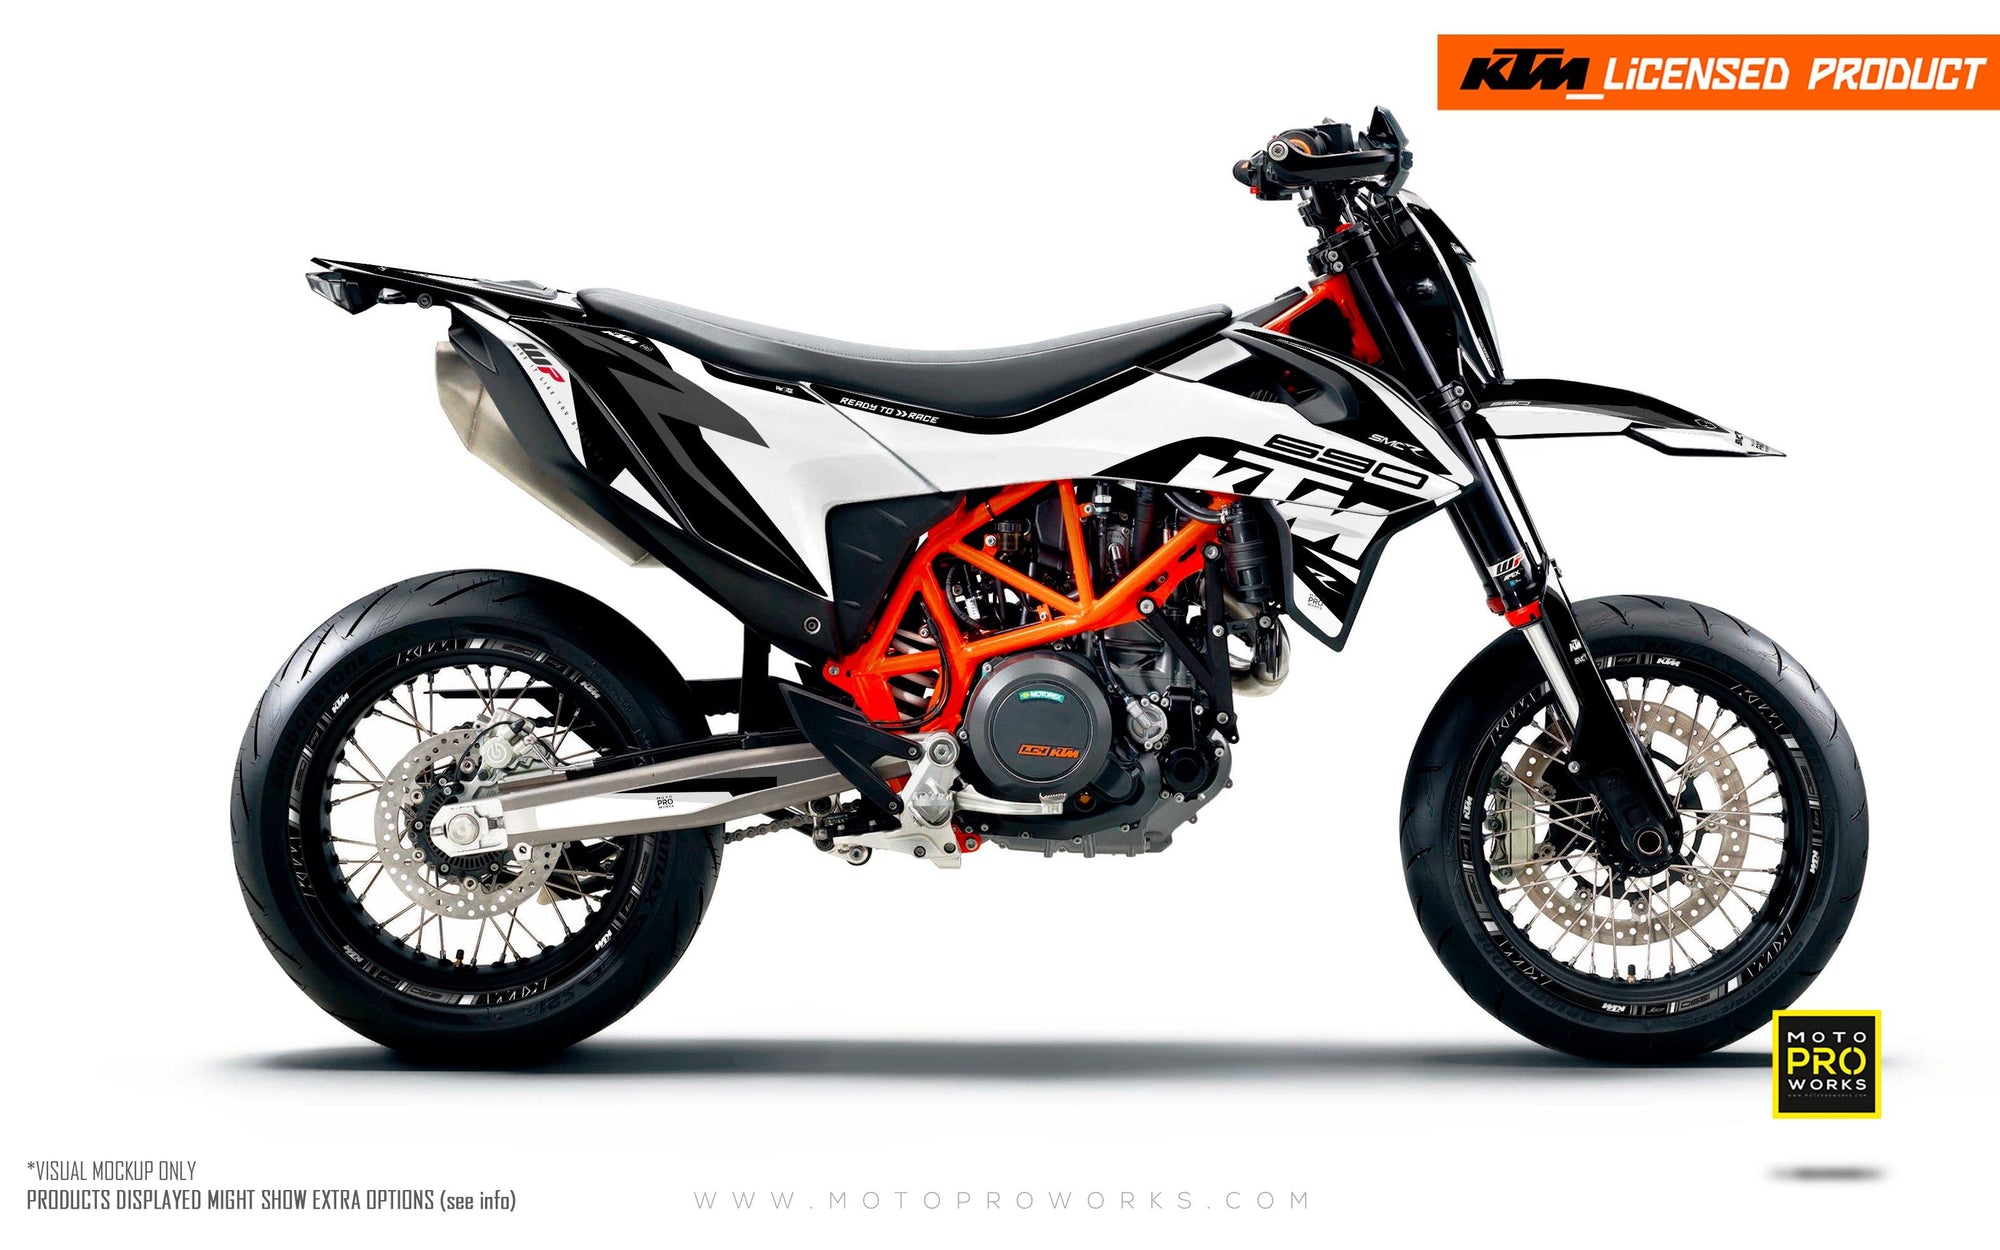 KTM GRAPHIC KIT - "Torque" (White/Black) - MotoProWorks | Decals and Bike Graphic kit